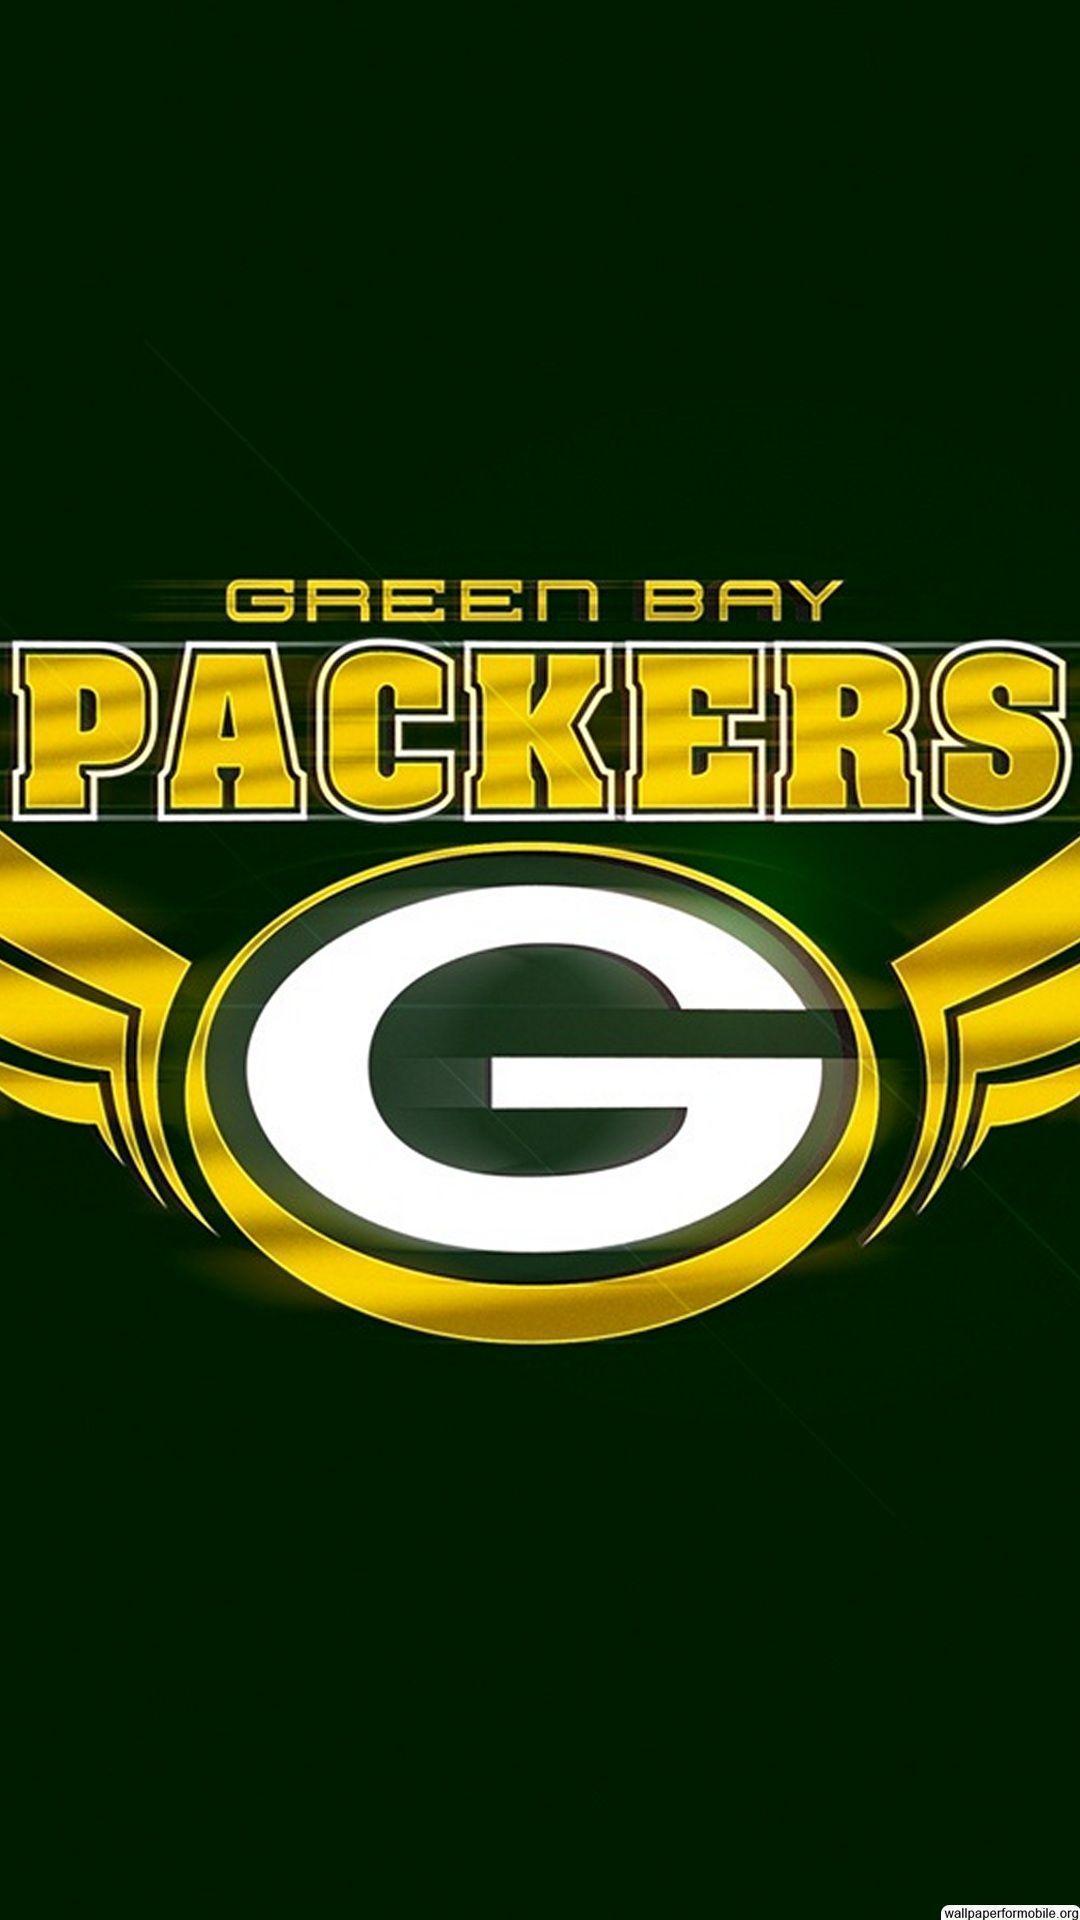 Wallpaper Of Green Bay Packers. Wallpaper for Mobile